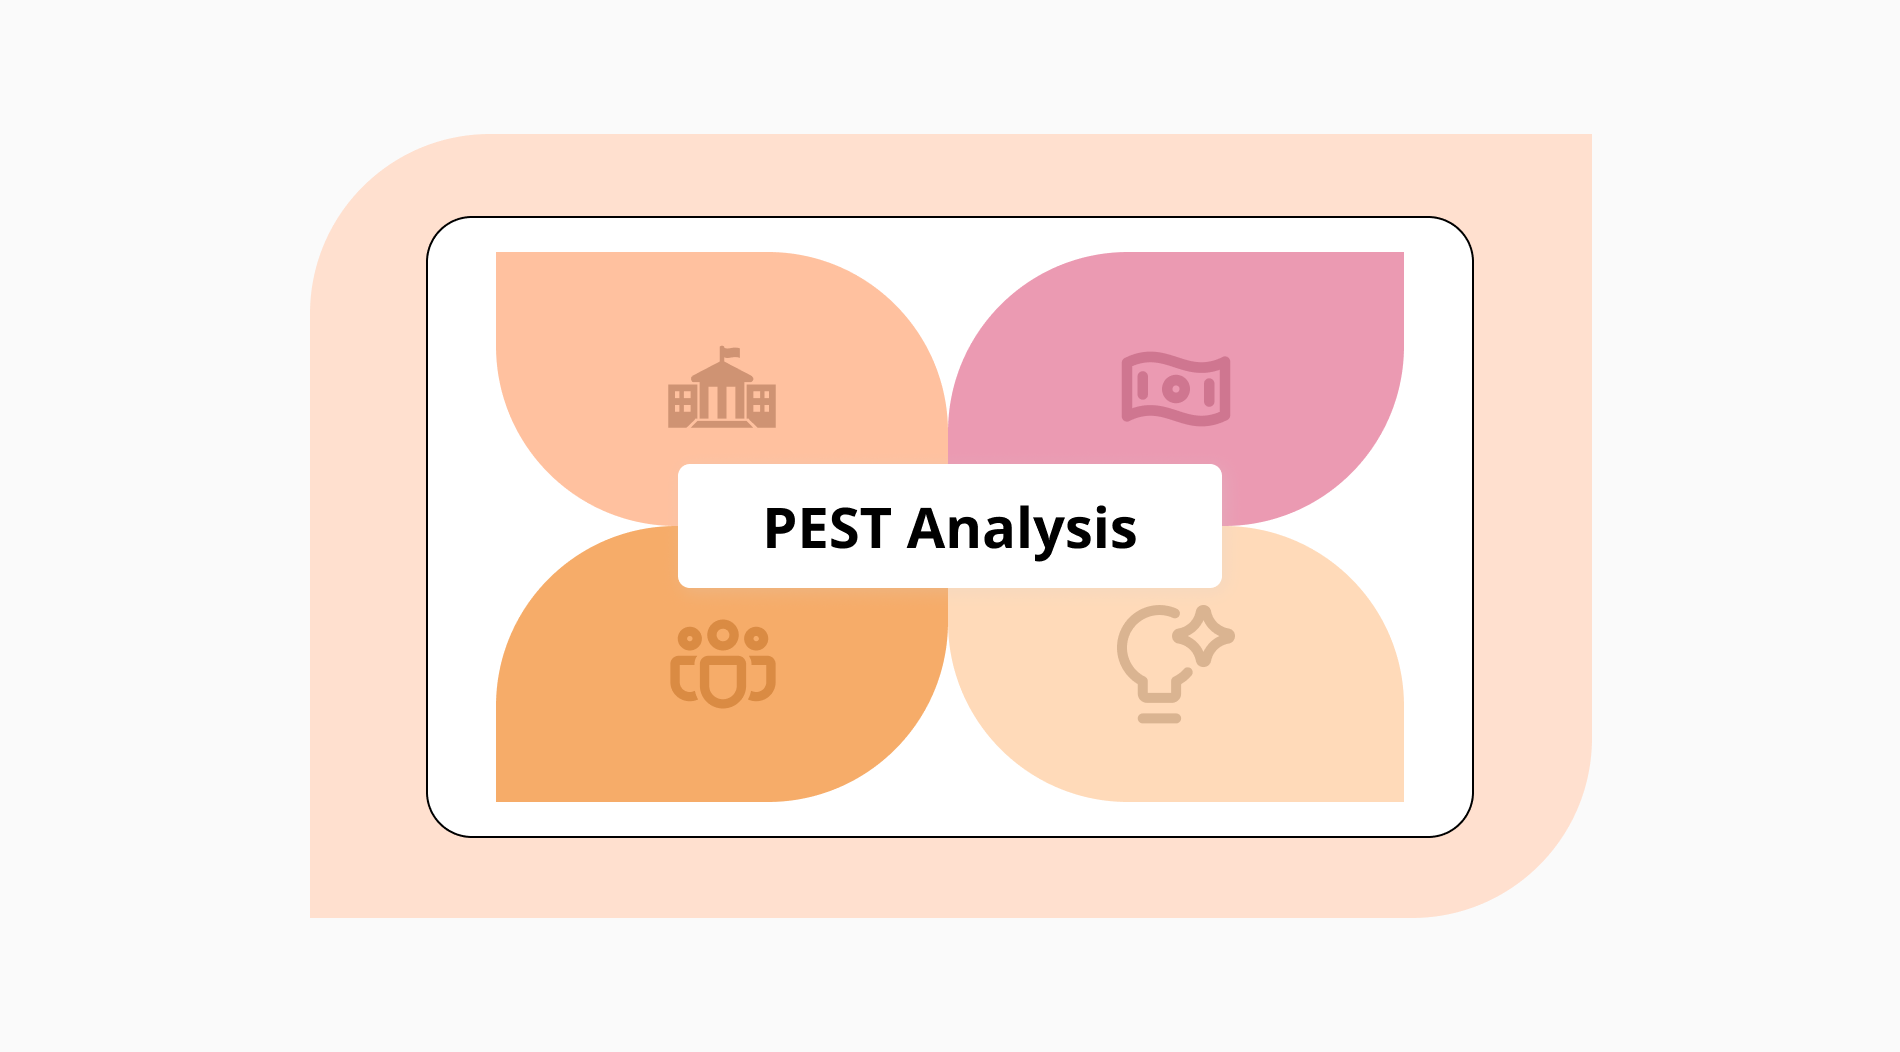 A full guide to the PEST analysis